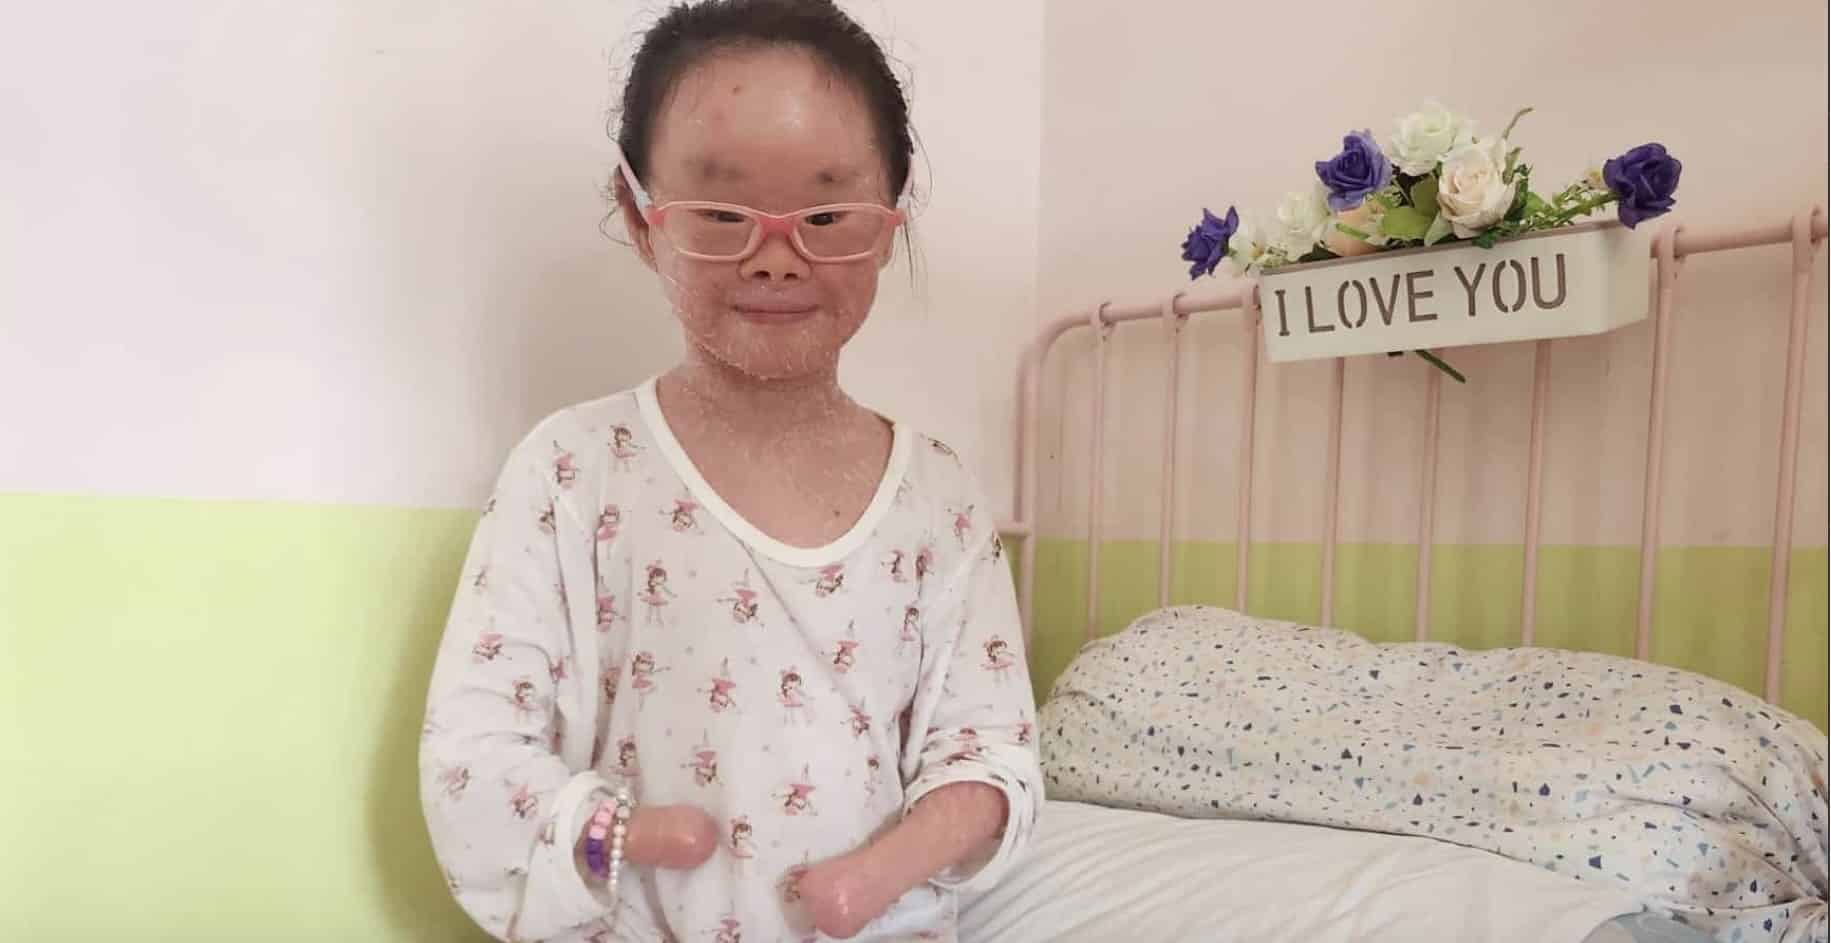 This Singaporean girl with an extremely rare skin condition has beaten the odds to survive and thrive